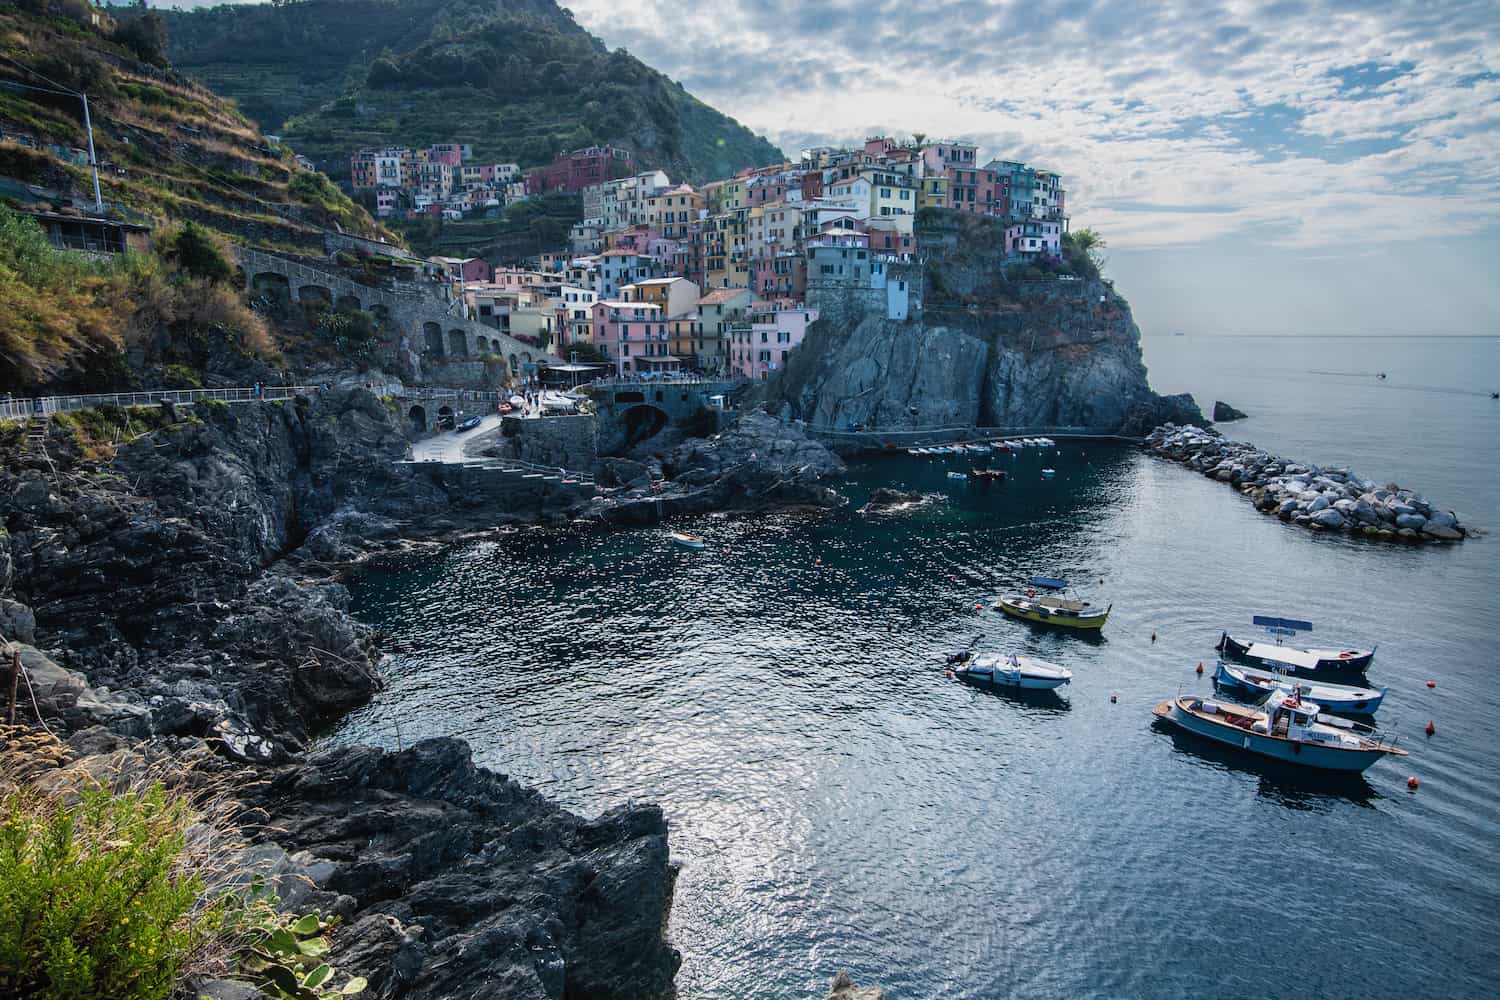 Traveling to Cinque Terre